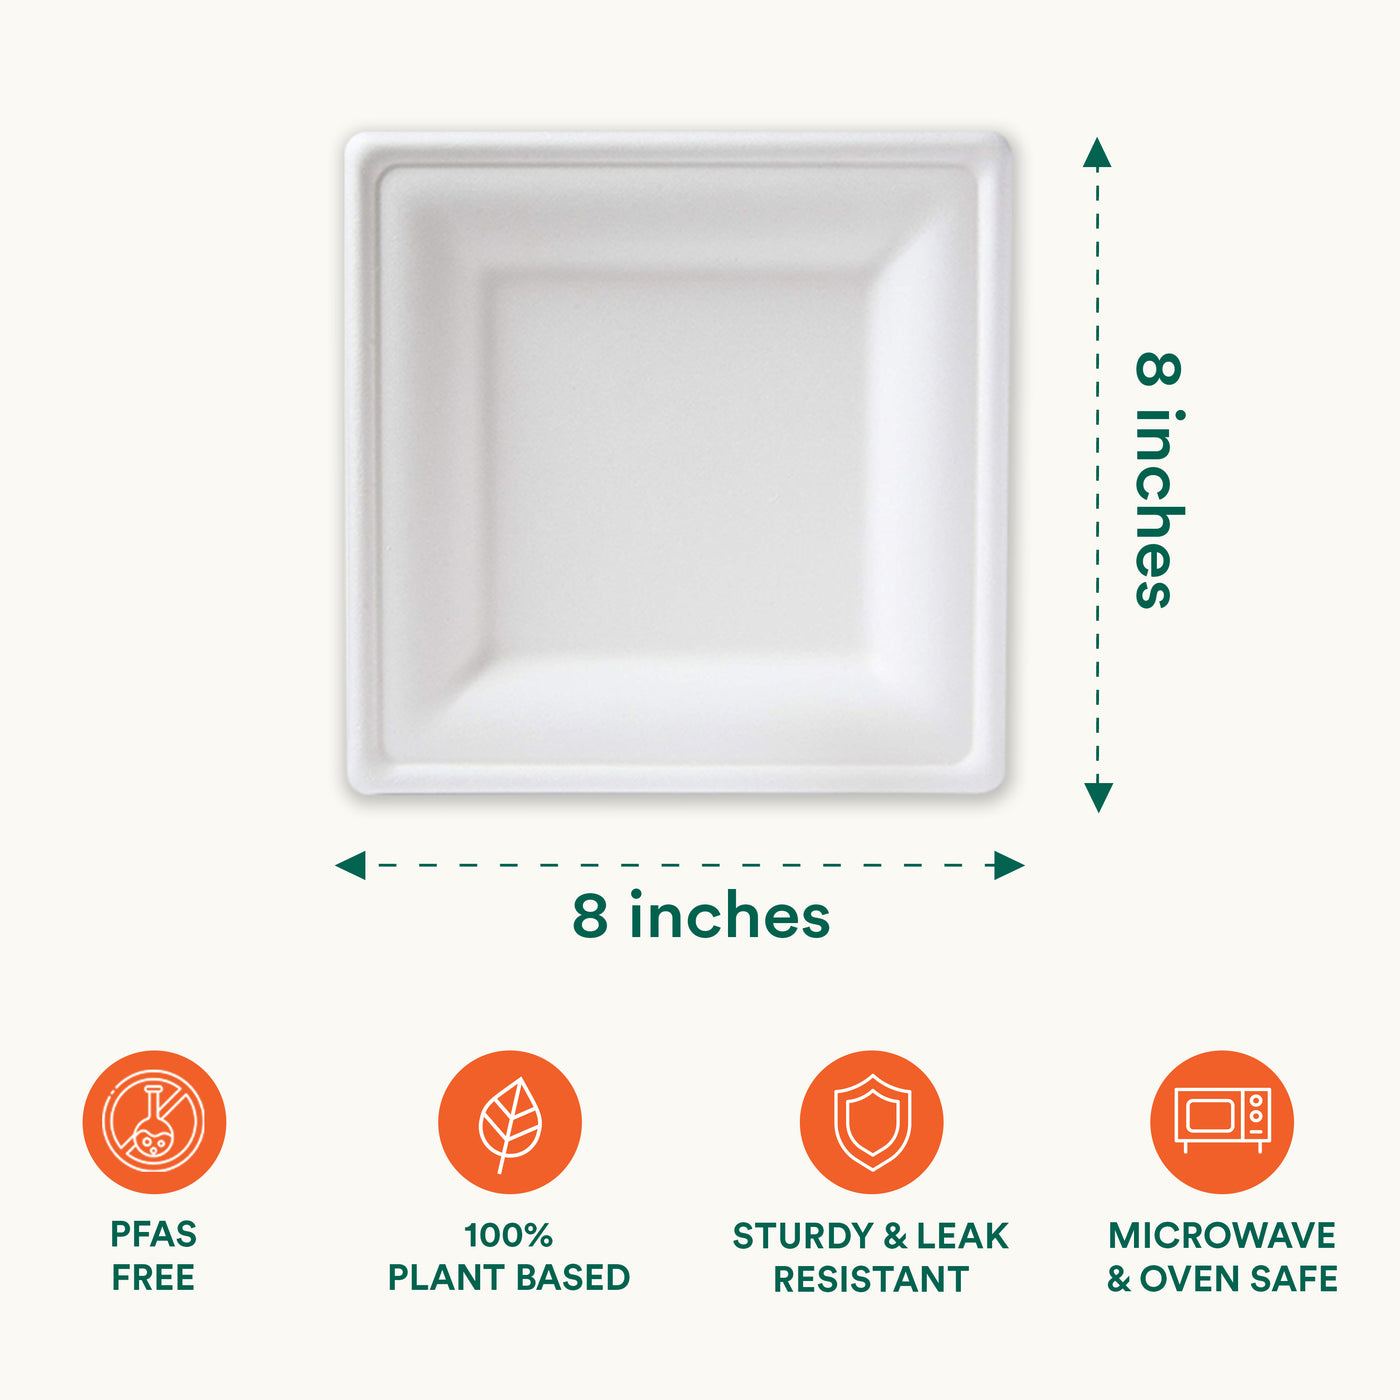 A square white plate with measurements, showcasing the size and features of Square Pearl White Compostable Plates.